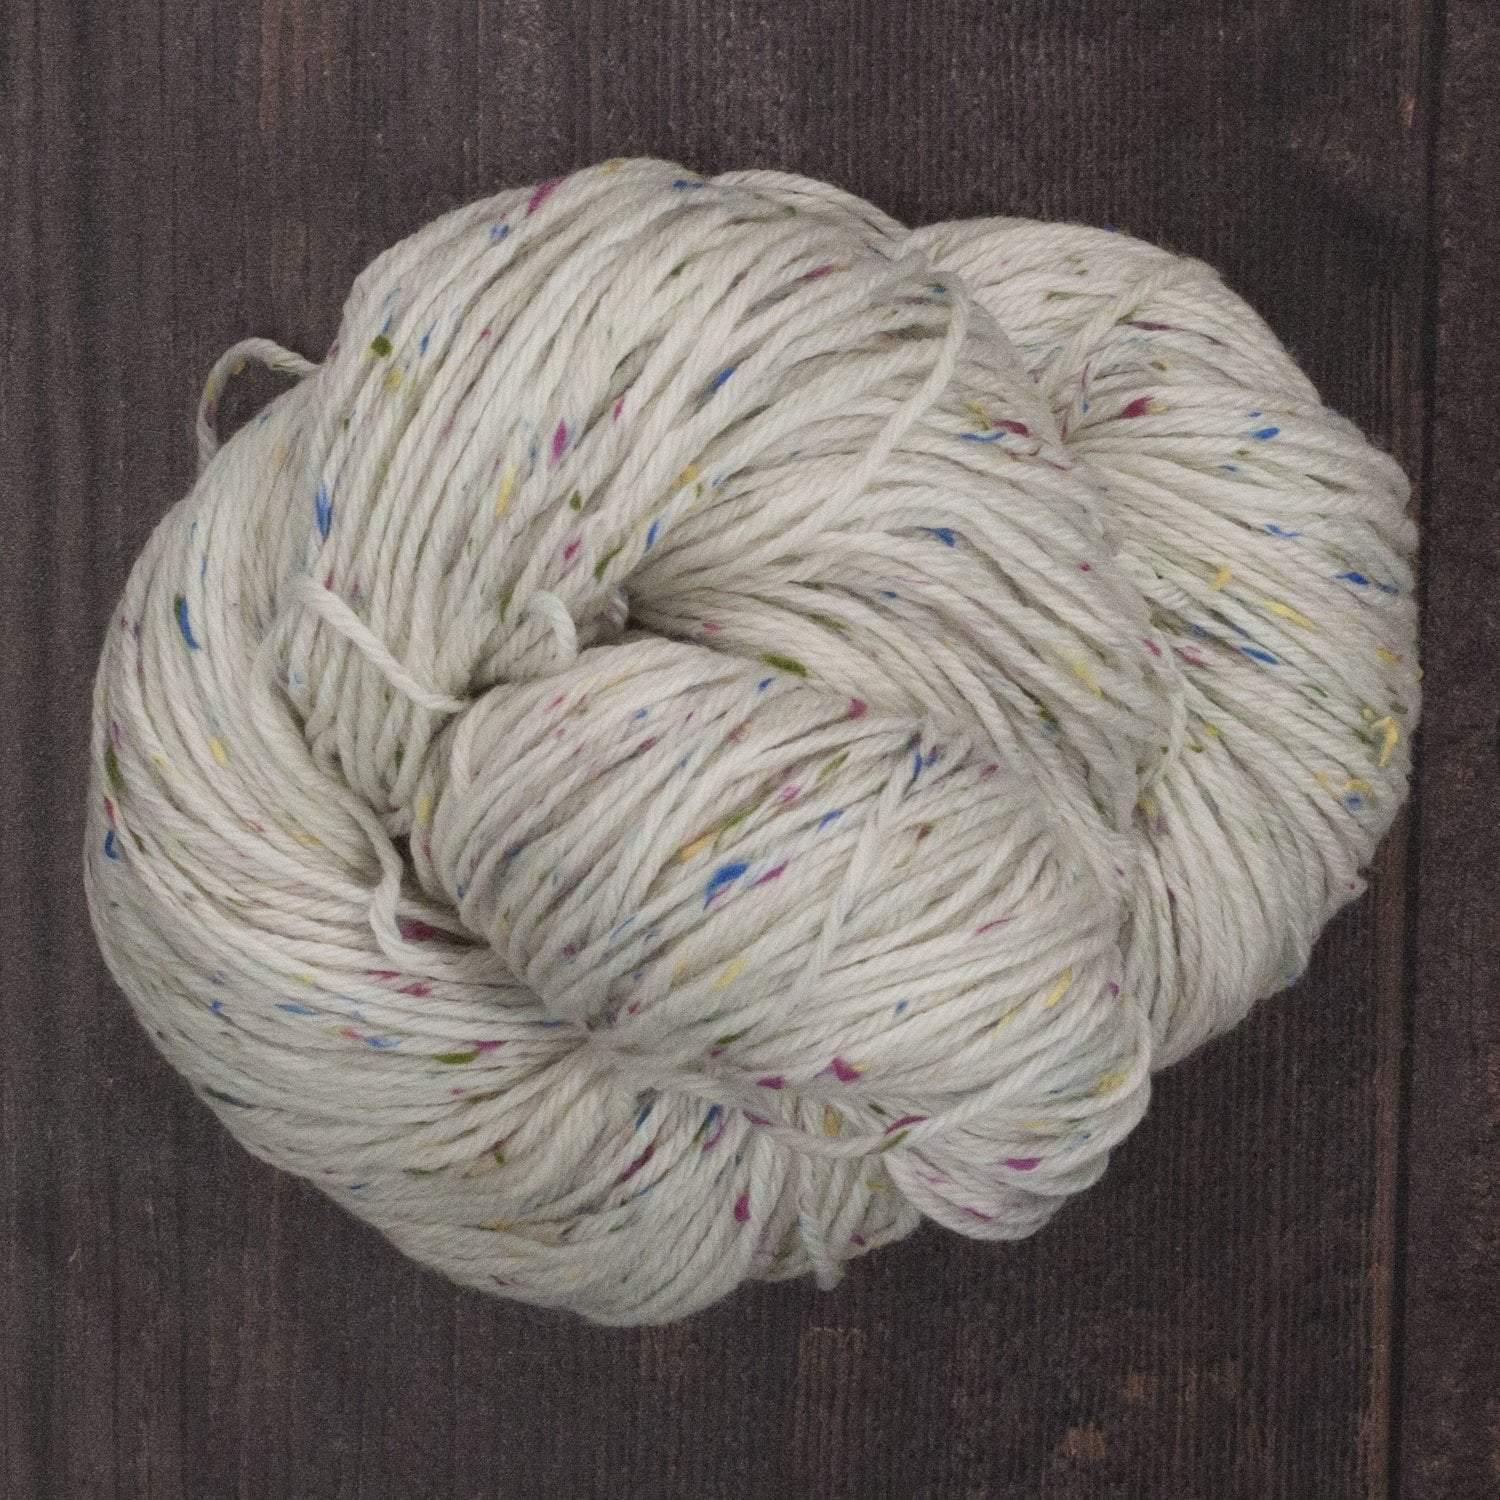 Merino Donegal Multi-Coloured DK - Undyed Undyed